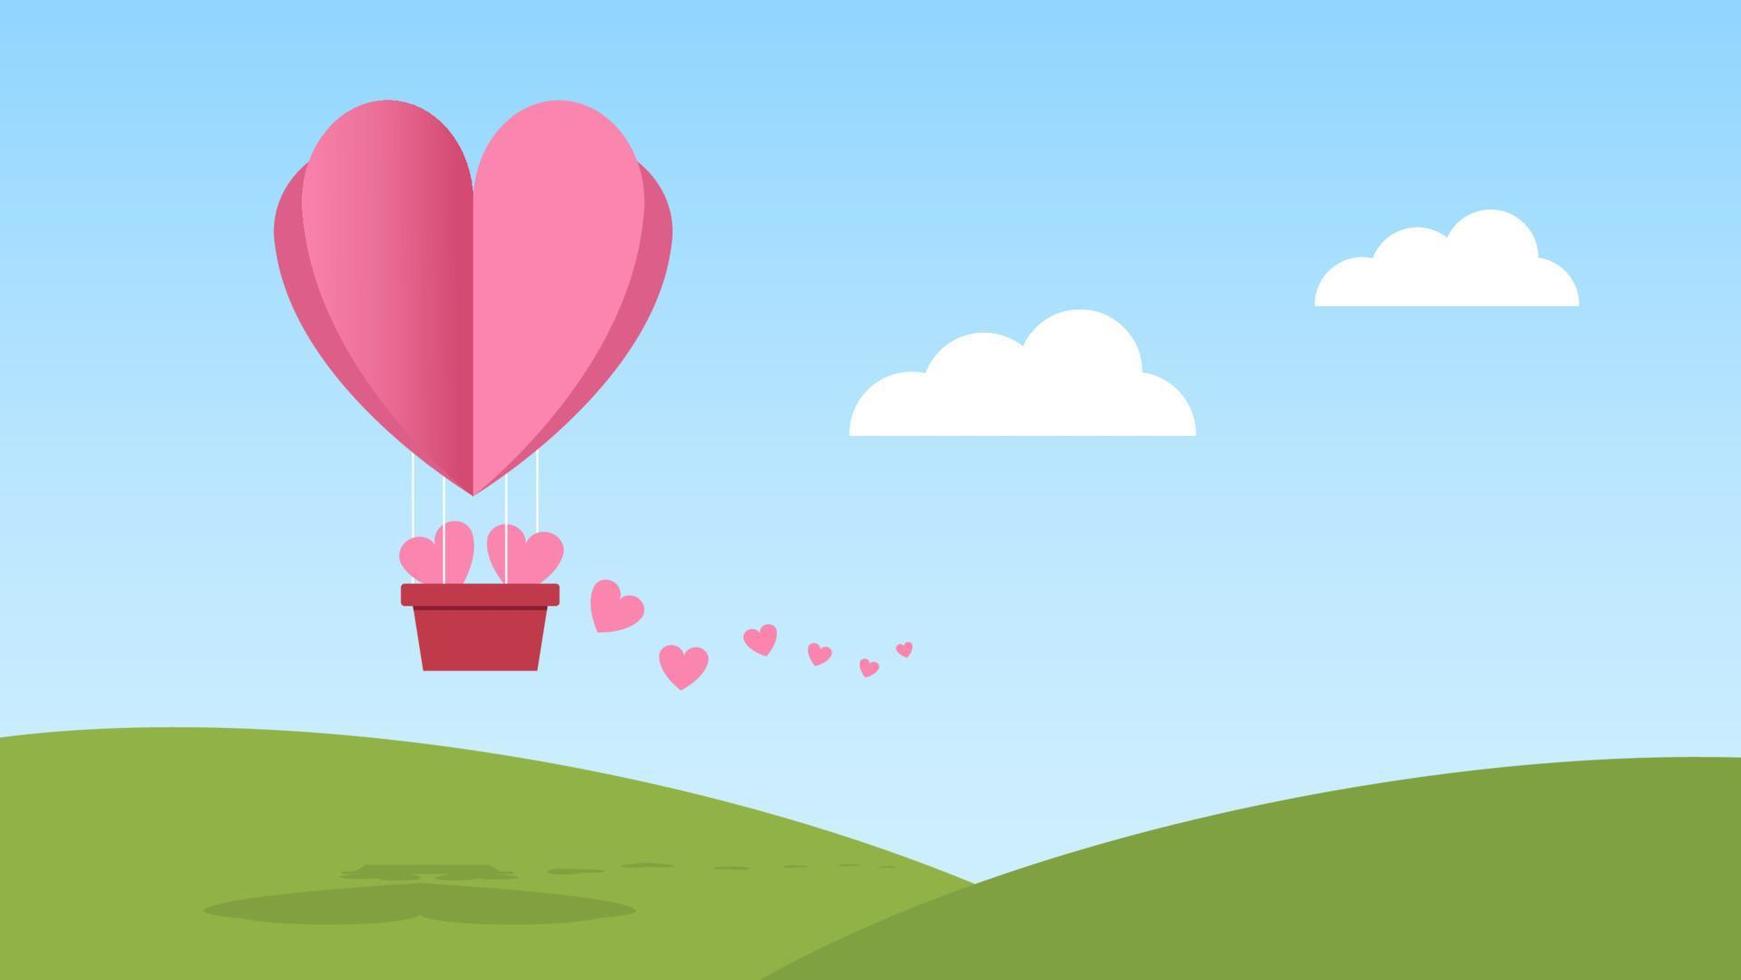 balloon with heart trail on blue sky with white cloud above green hill. love and care concept vector